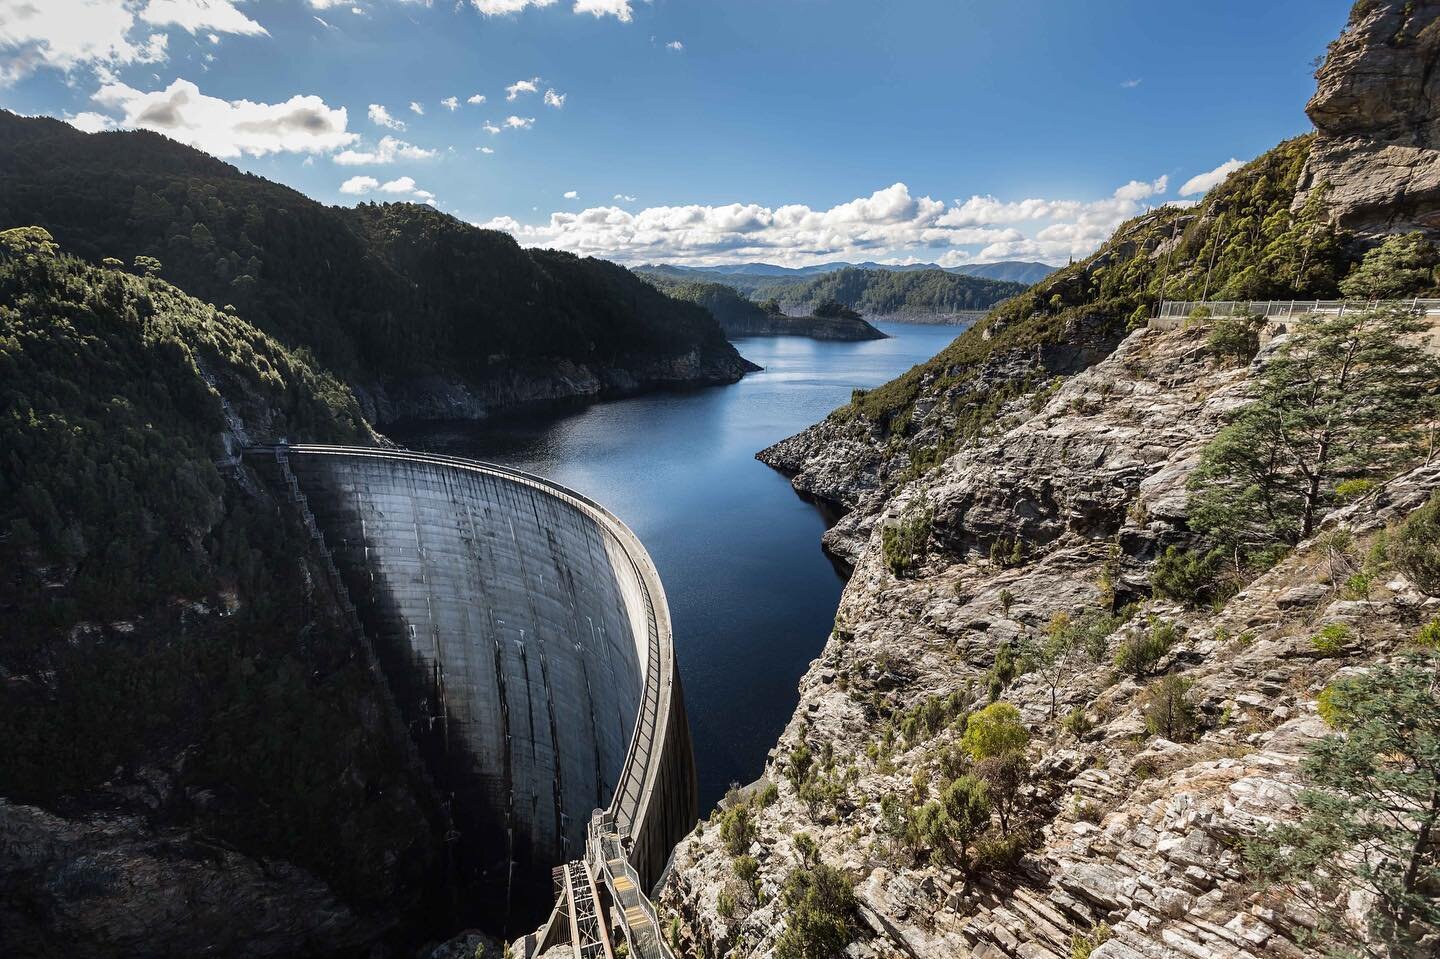 Huge News Part 2- we also received the 2021 AILA National Landscape Architecture Award for Landscape Planning for our Manual for Evaluating the Visual Impact of Pumped Hydro Energy Storage 👏🏻

Jury Citation -

The jury was impressed with the landsc